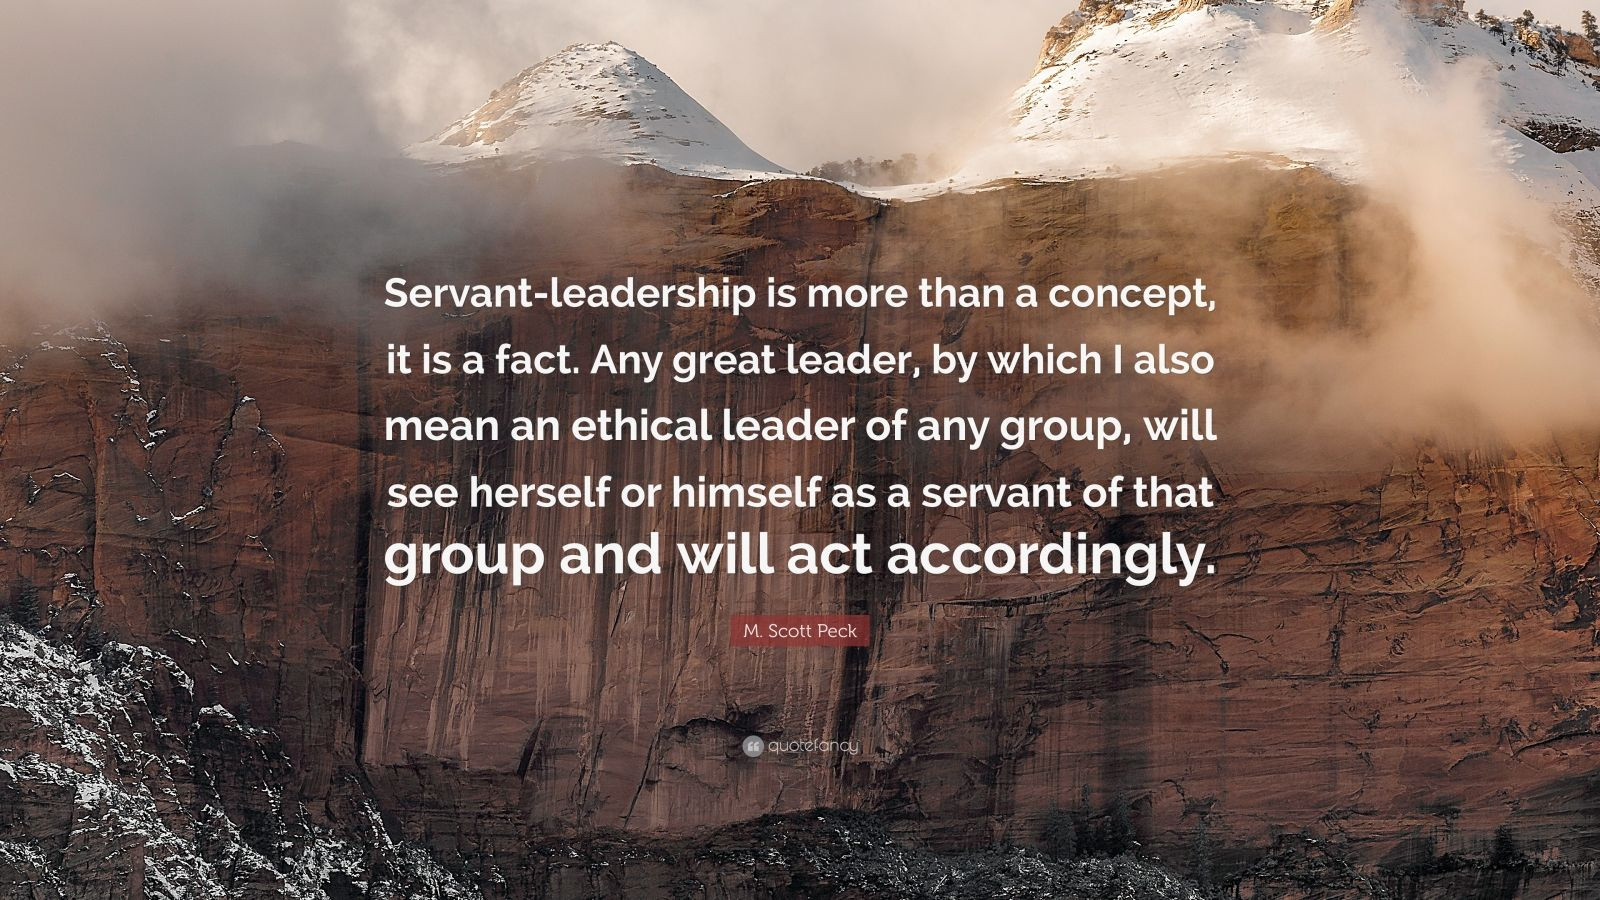 Quotes On Servant Leadership
 M Scott Peck Quote “Servant leadership is more than a